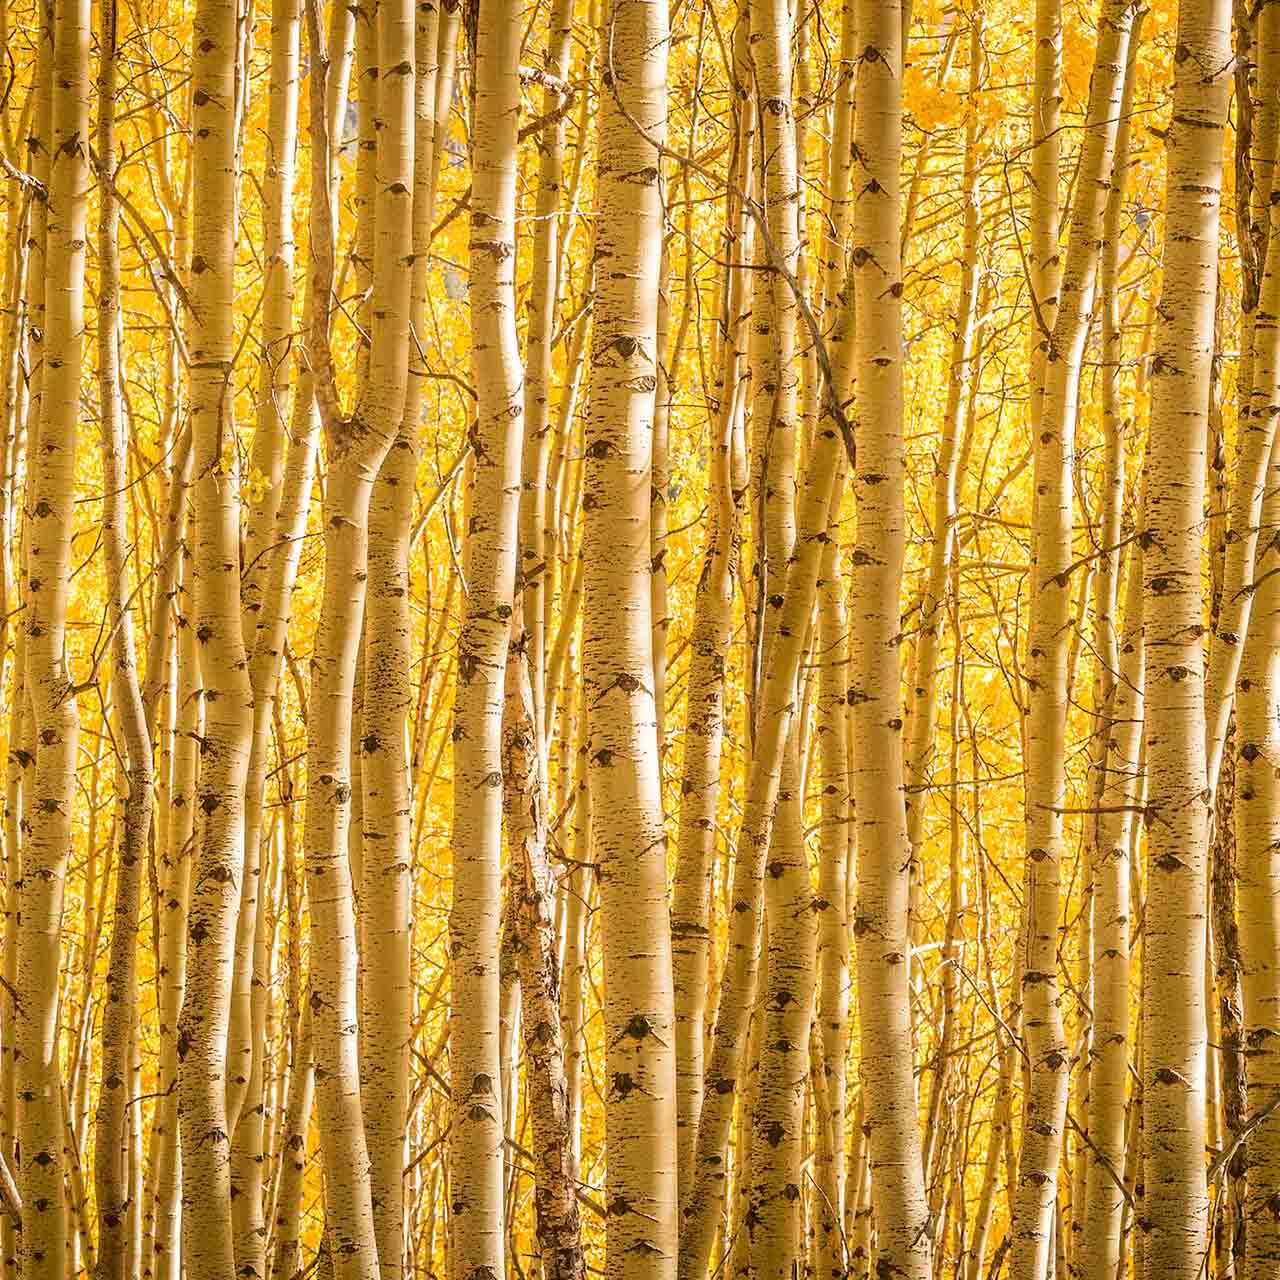 A woodland of Aspen trees in the Autumn